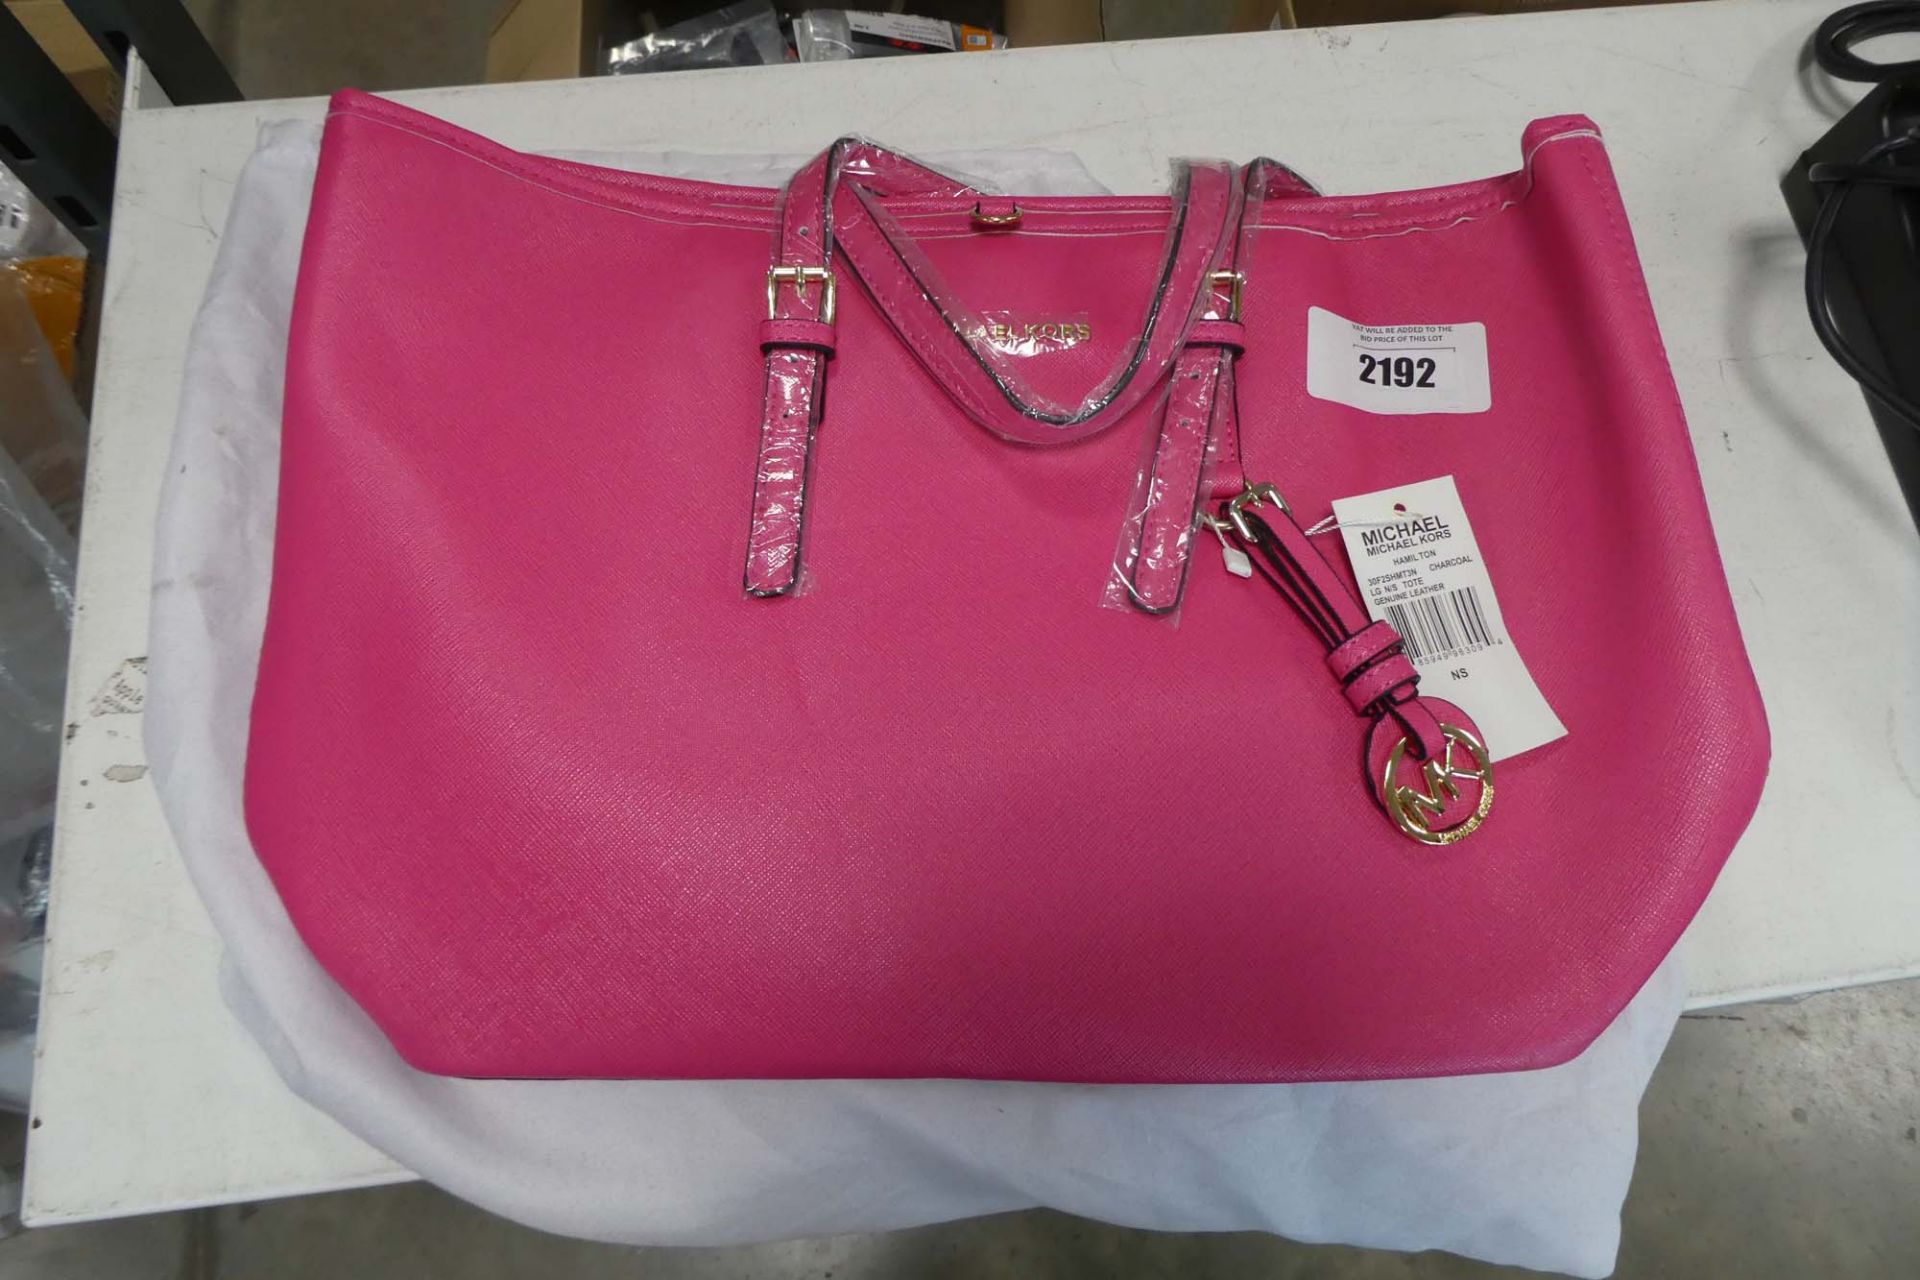 Pink Michael Kors bag with dust cover